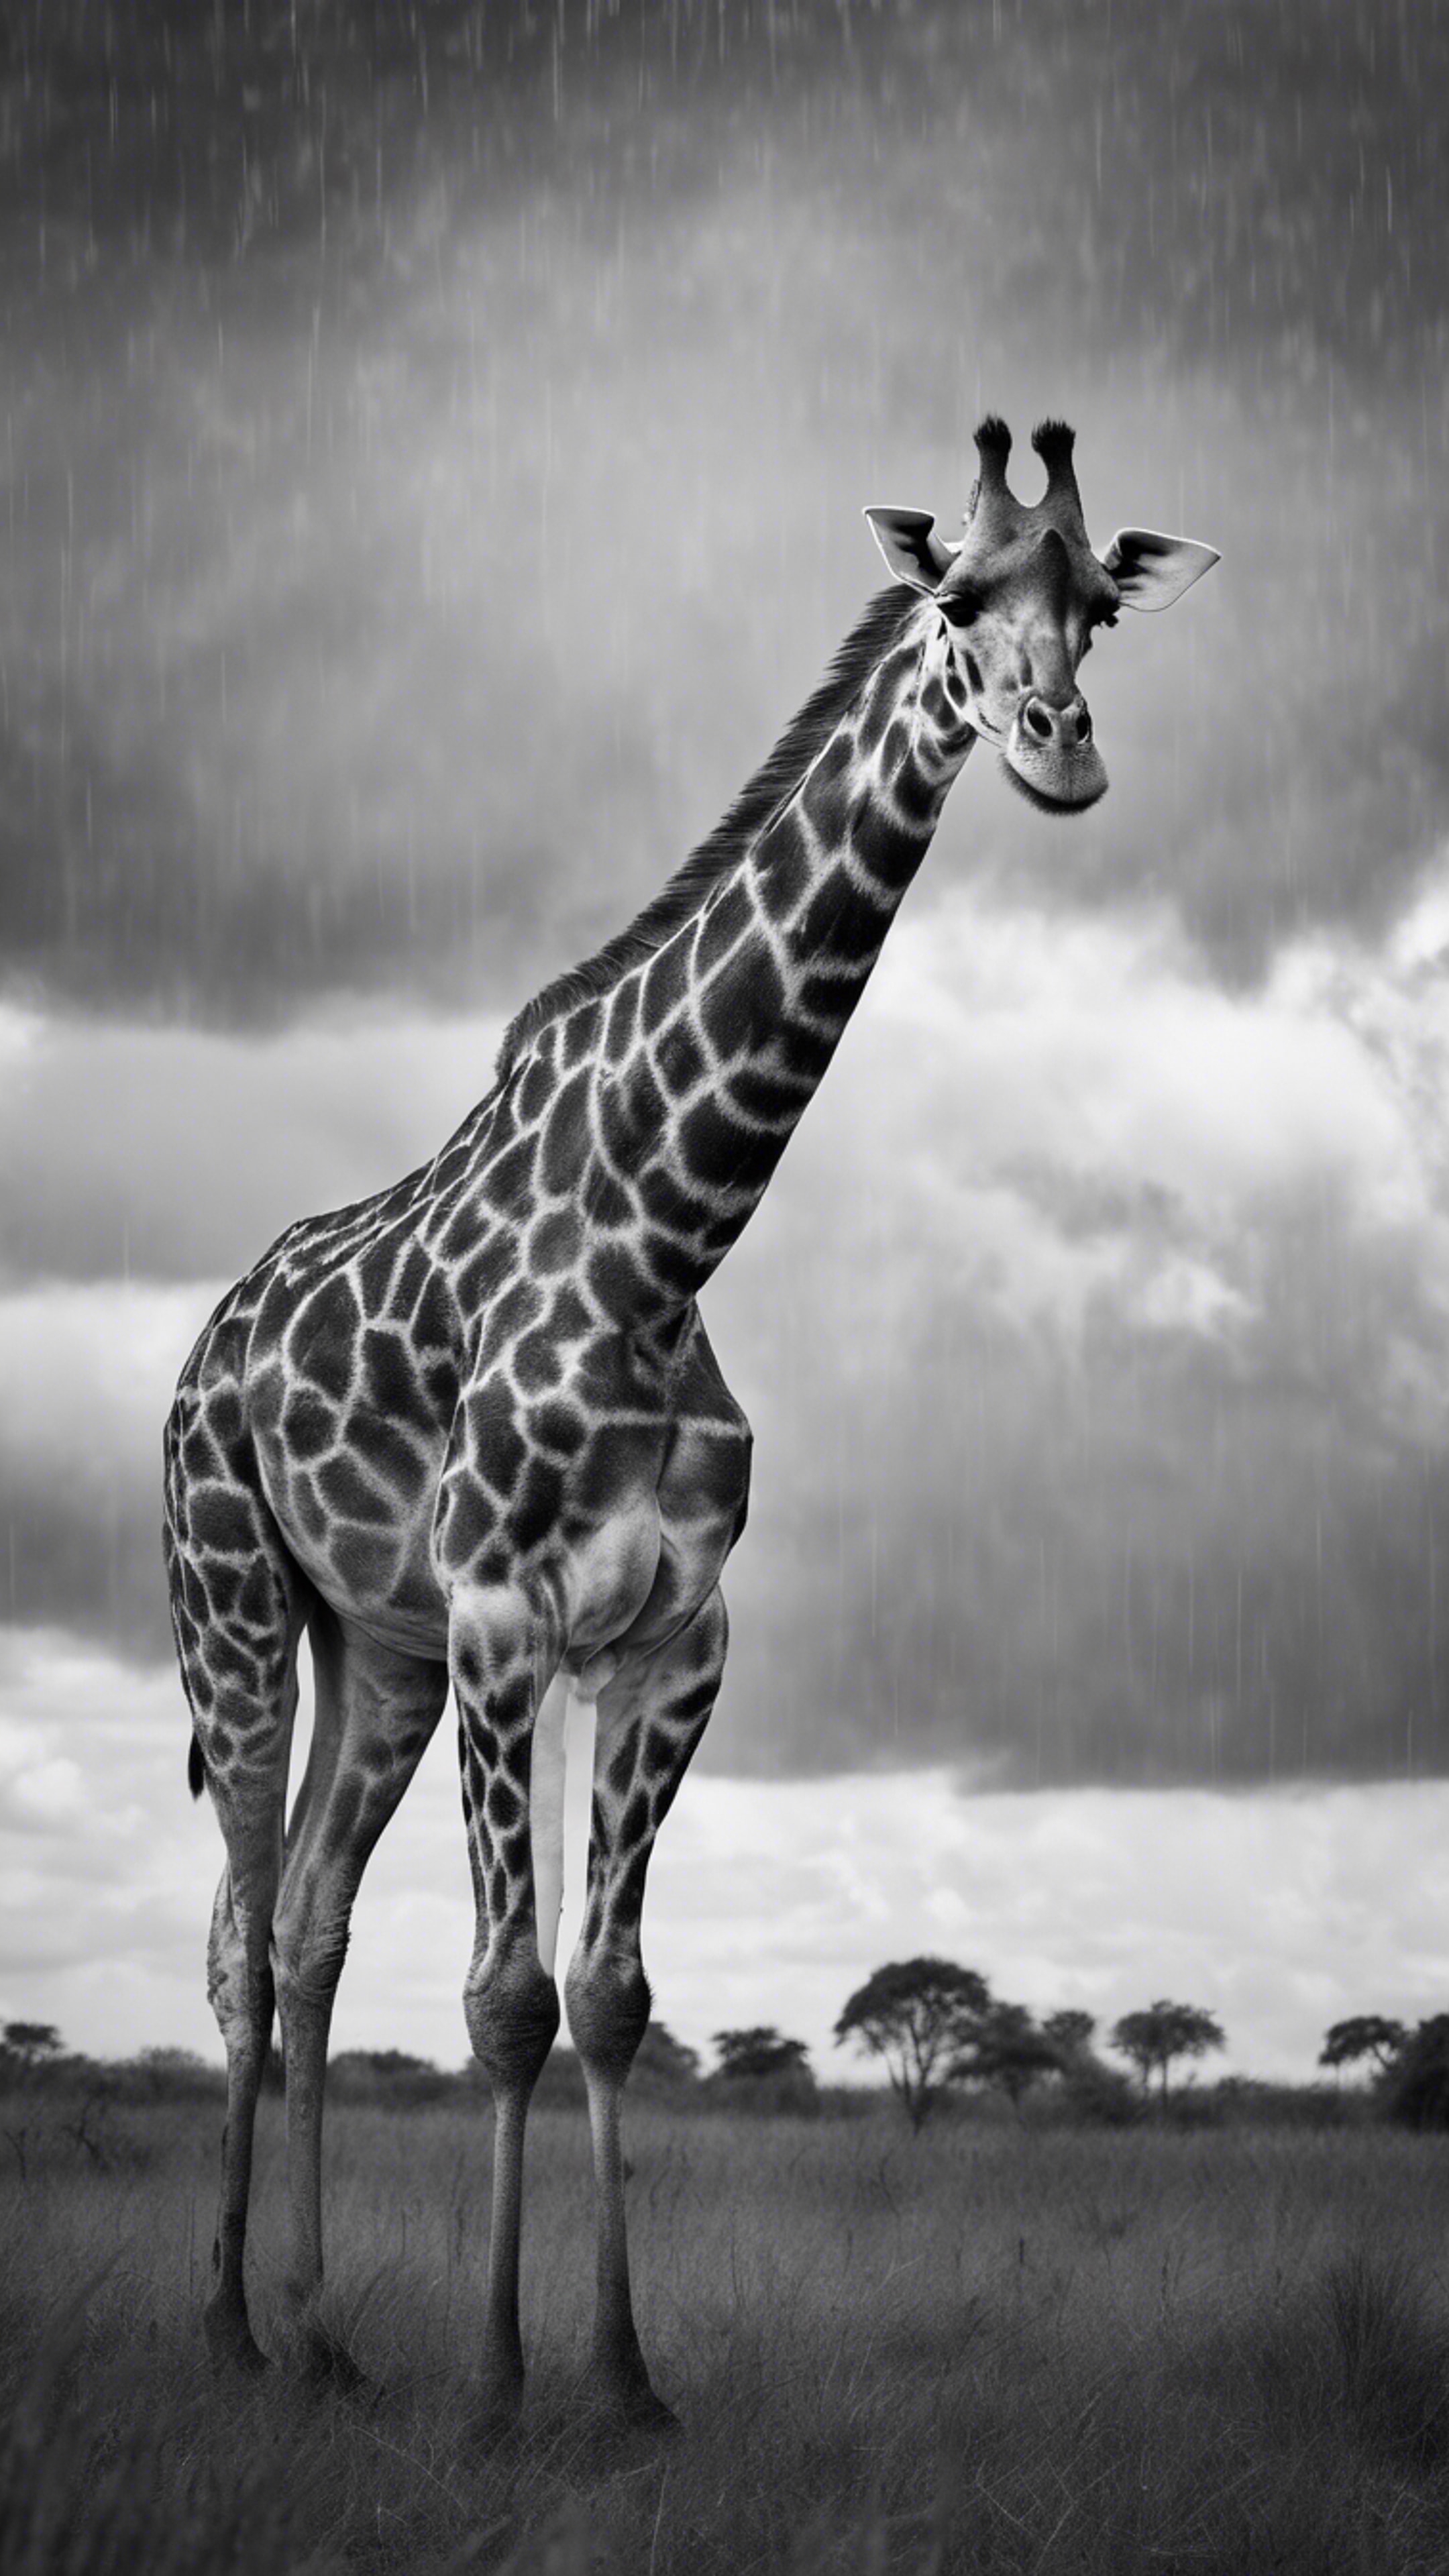 A beautifully photographed black and white image of a giraffe sauntering under rain clouds. Tapeta[33f5eecce55b4c40952e]